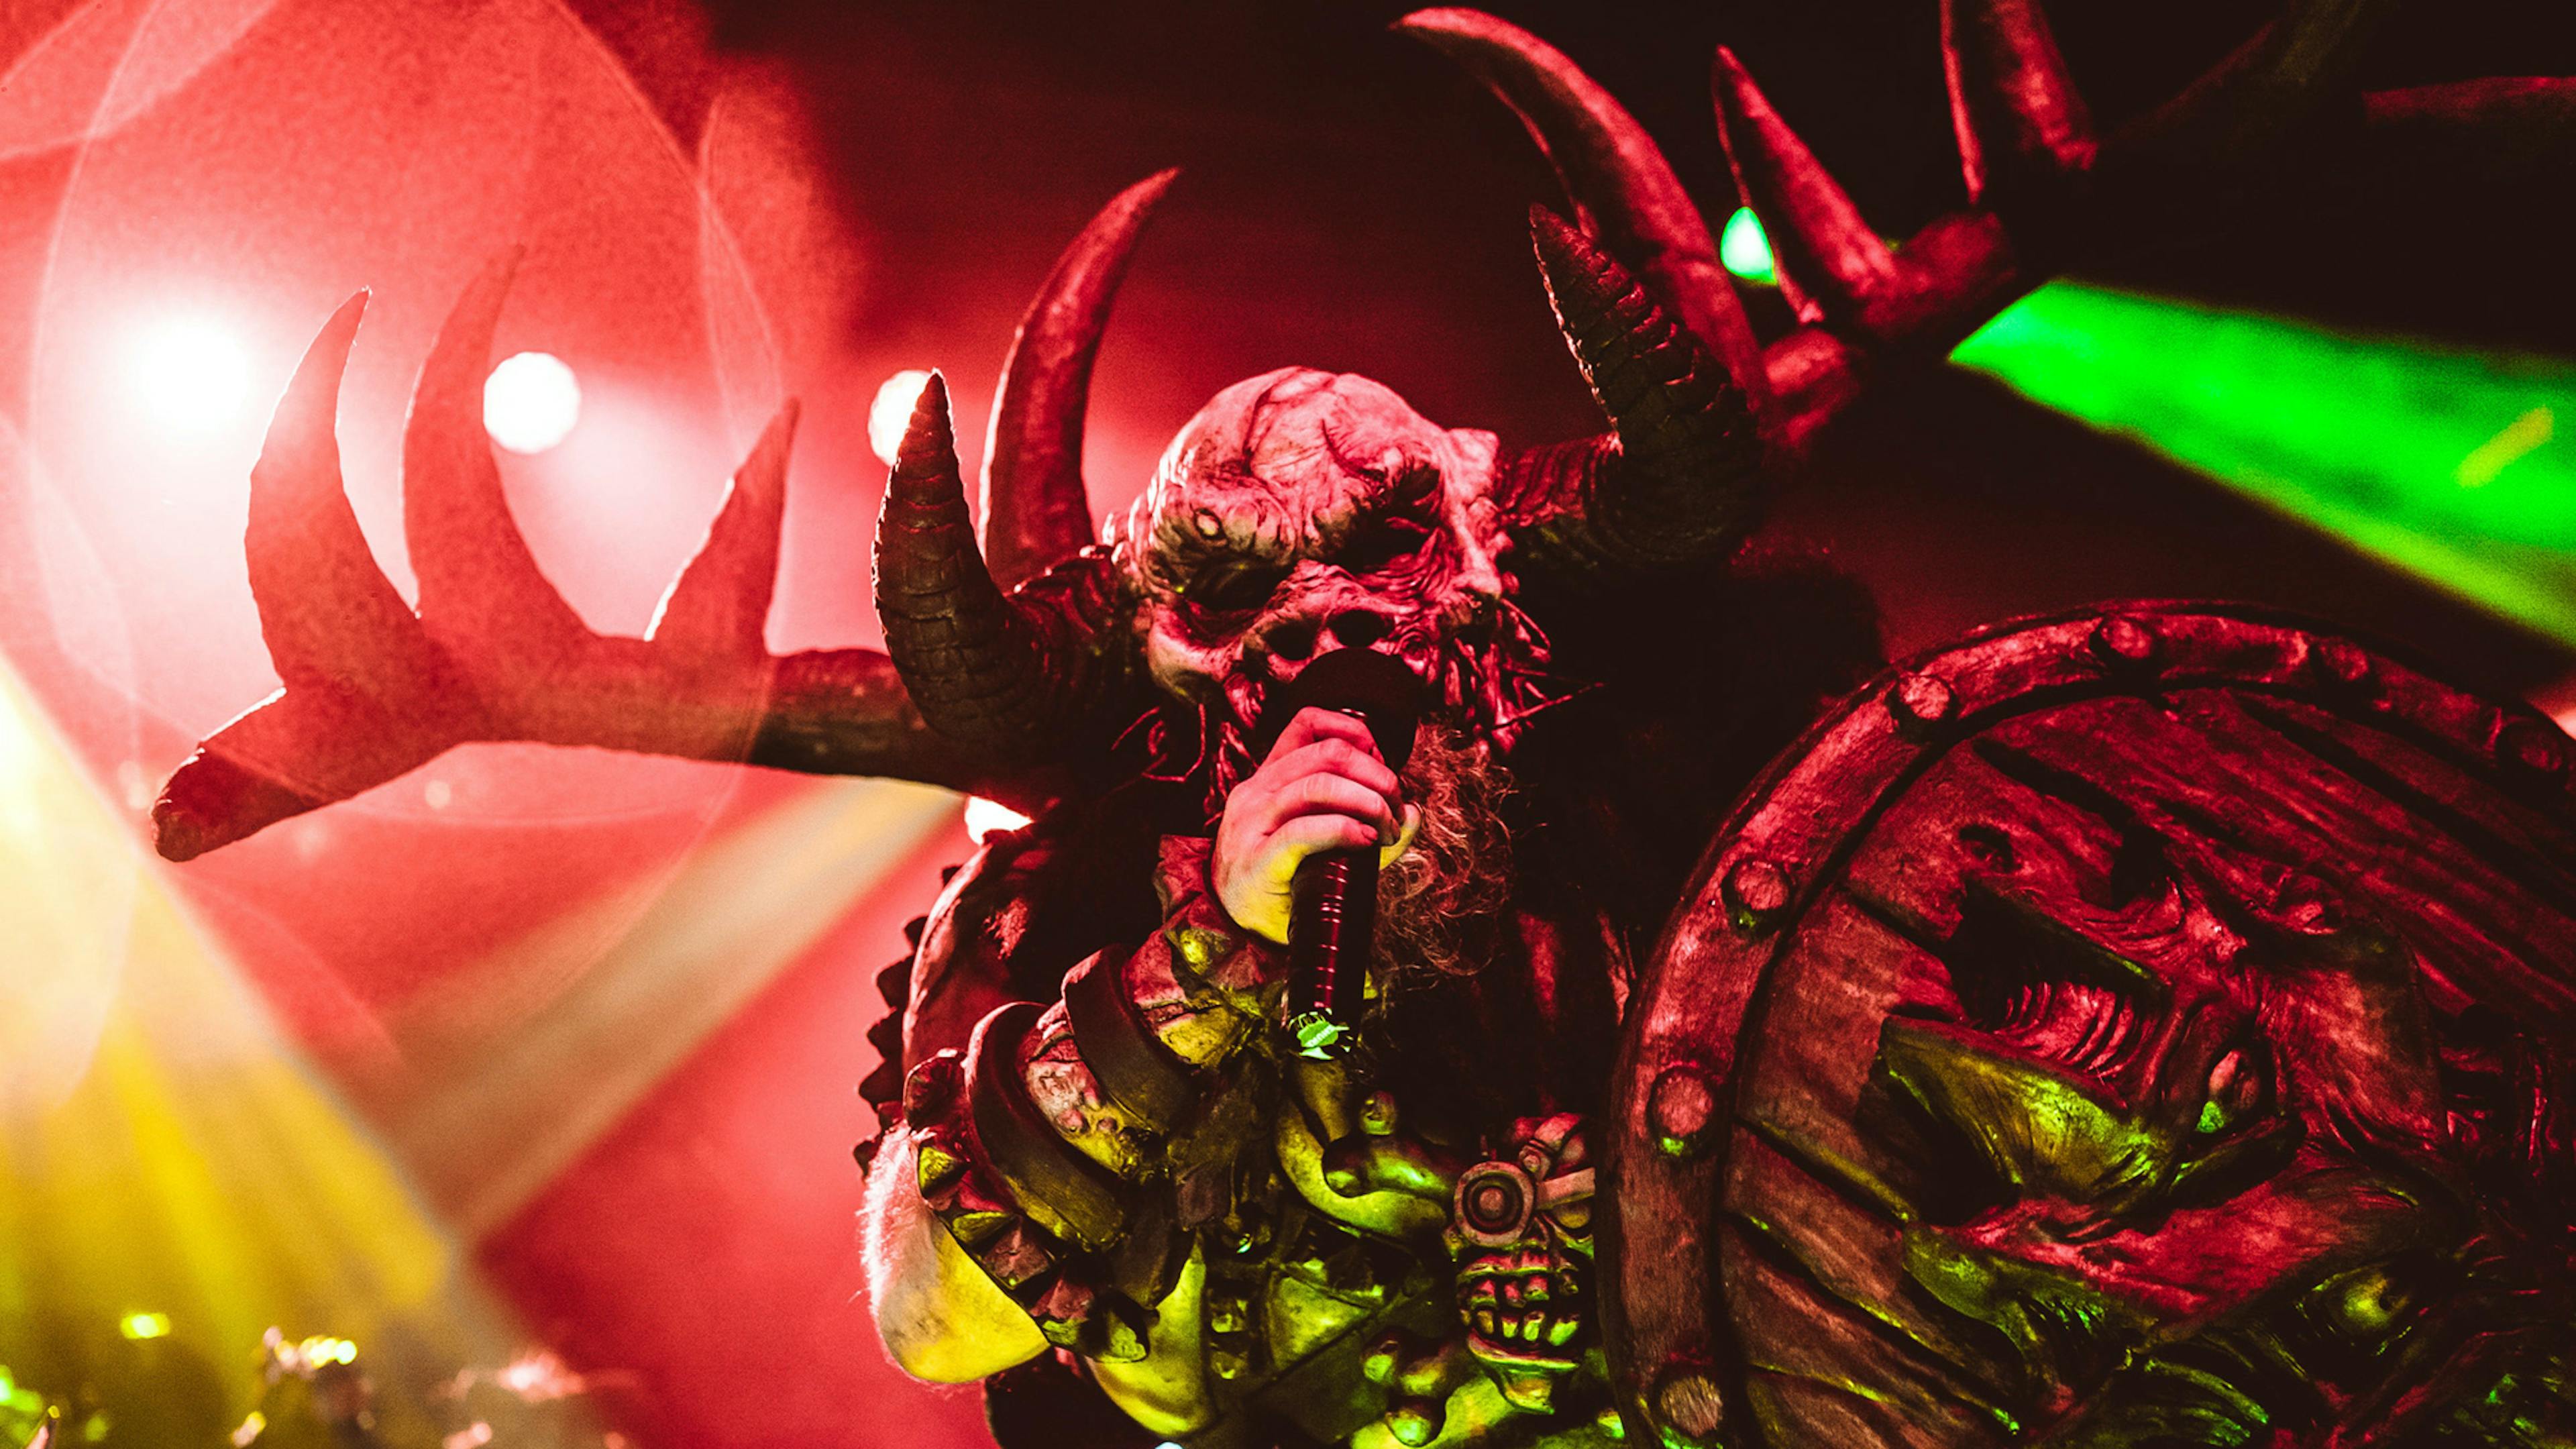 World premiere date announced for new This Is GWAR documentary